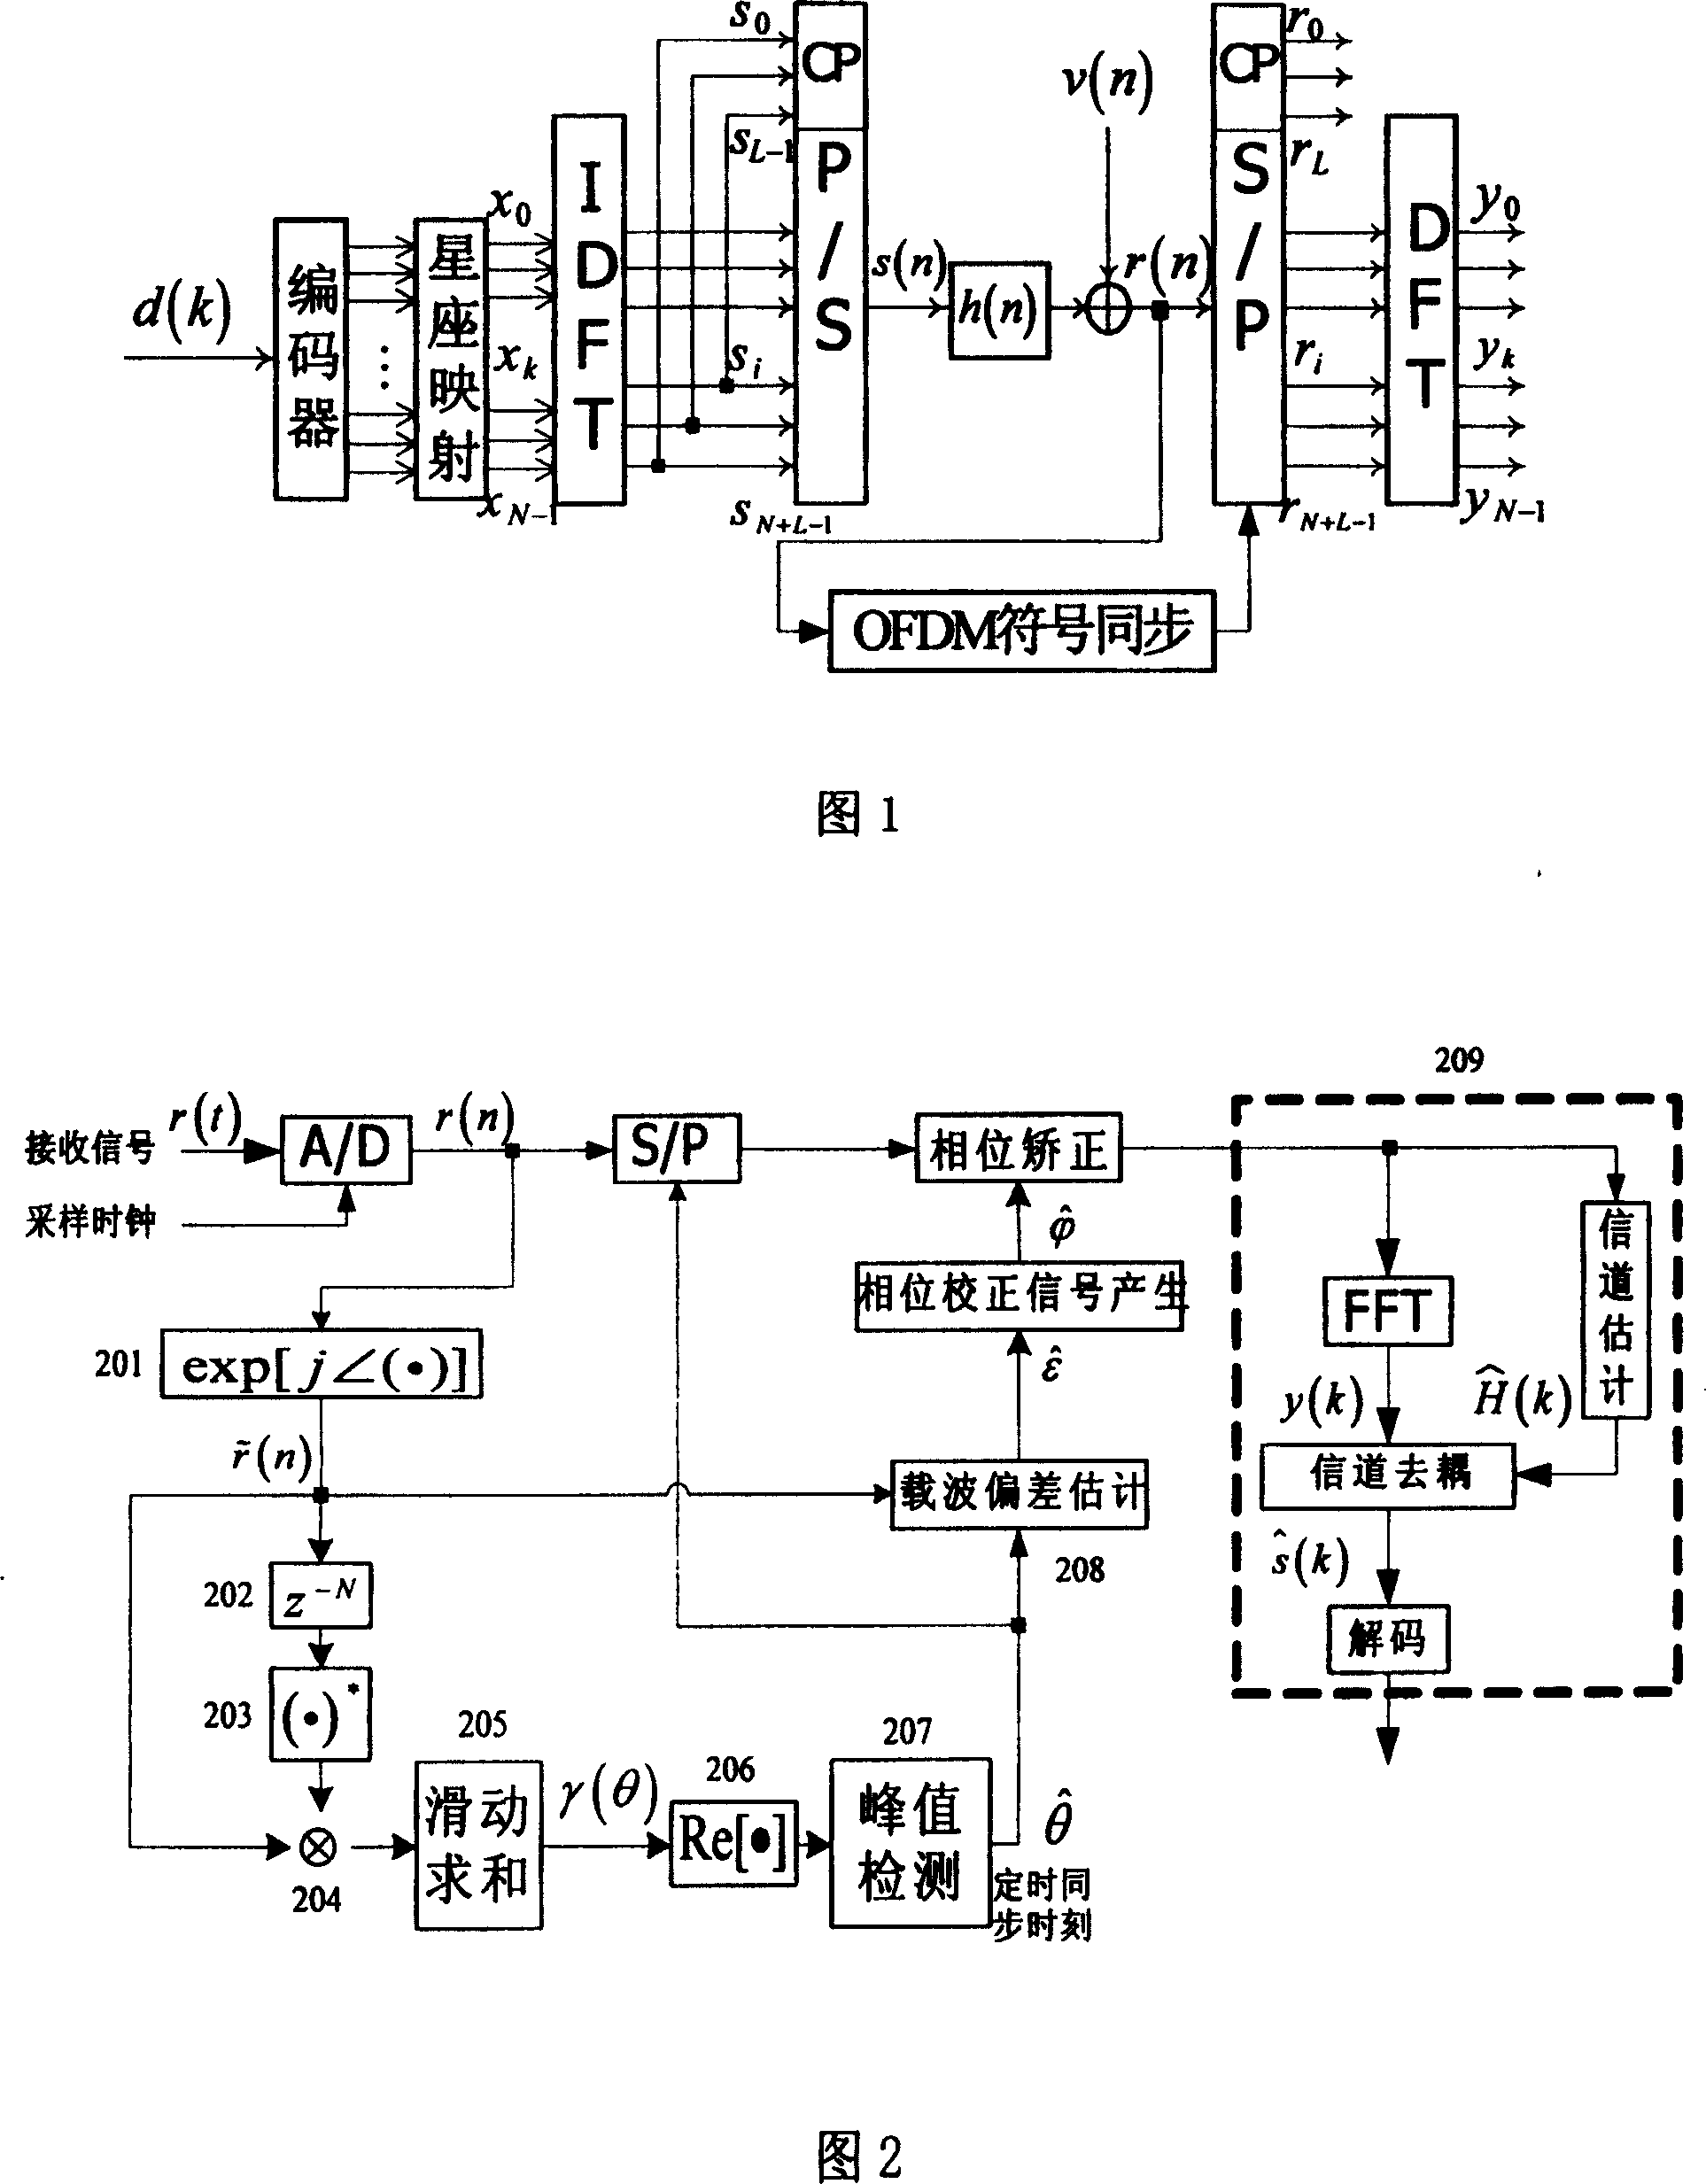 OFDM blind synchronizing method based on phase information and real part detection